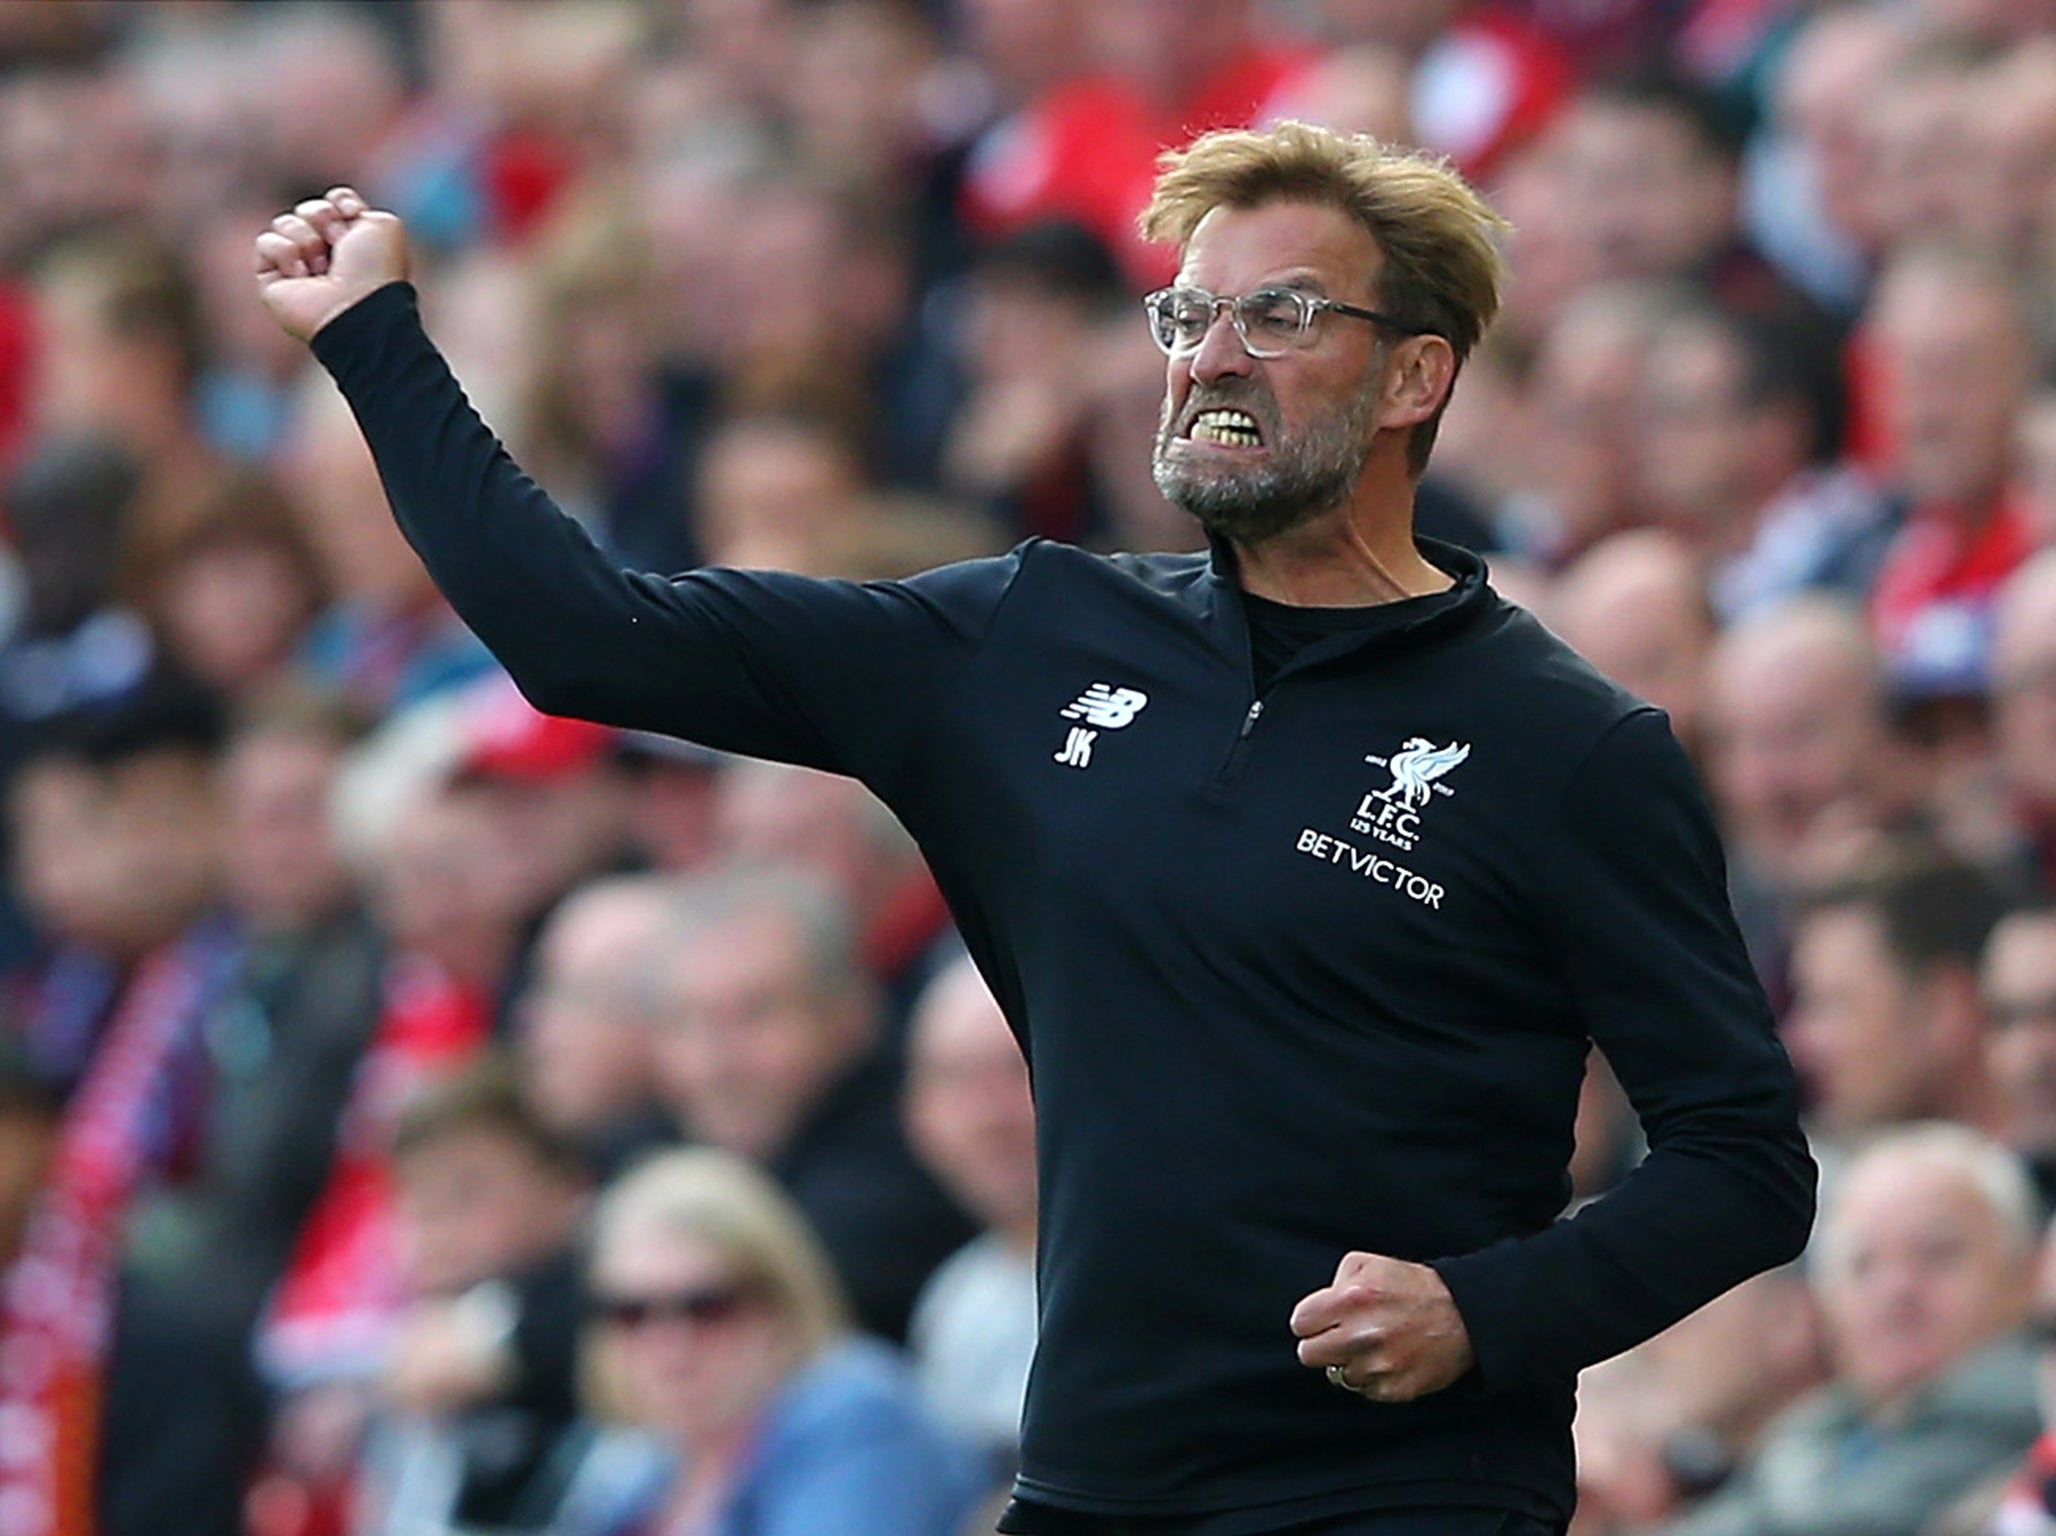 Klopp said he did not feel 'any positivity' after the draw